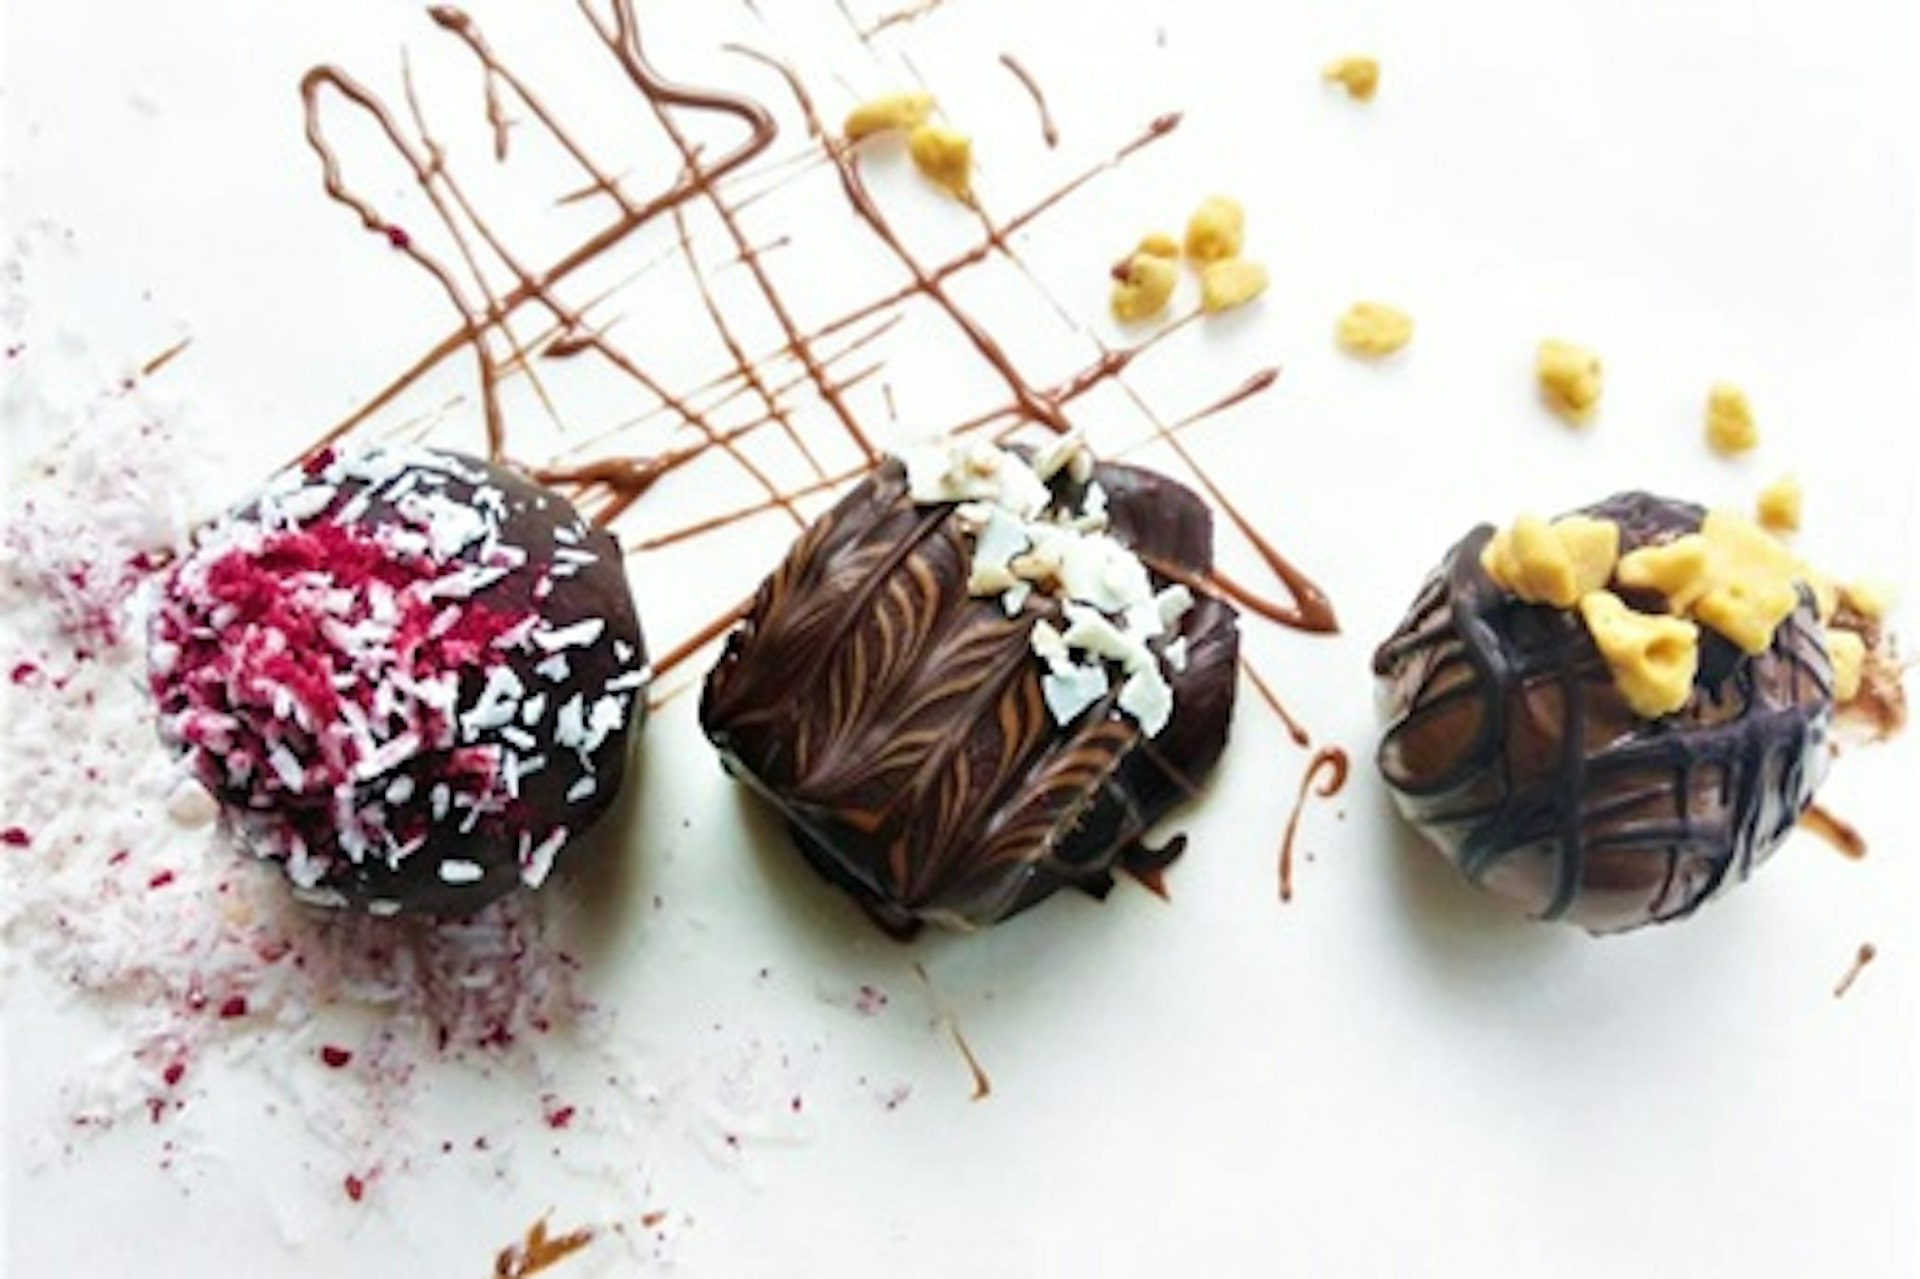 Live Online Chocolate Truffle Making Experience with Kit for Two with My Chocolate 4